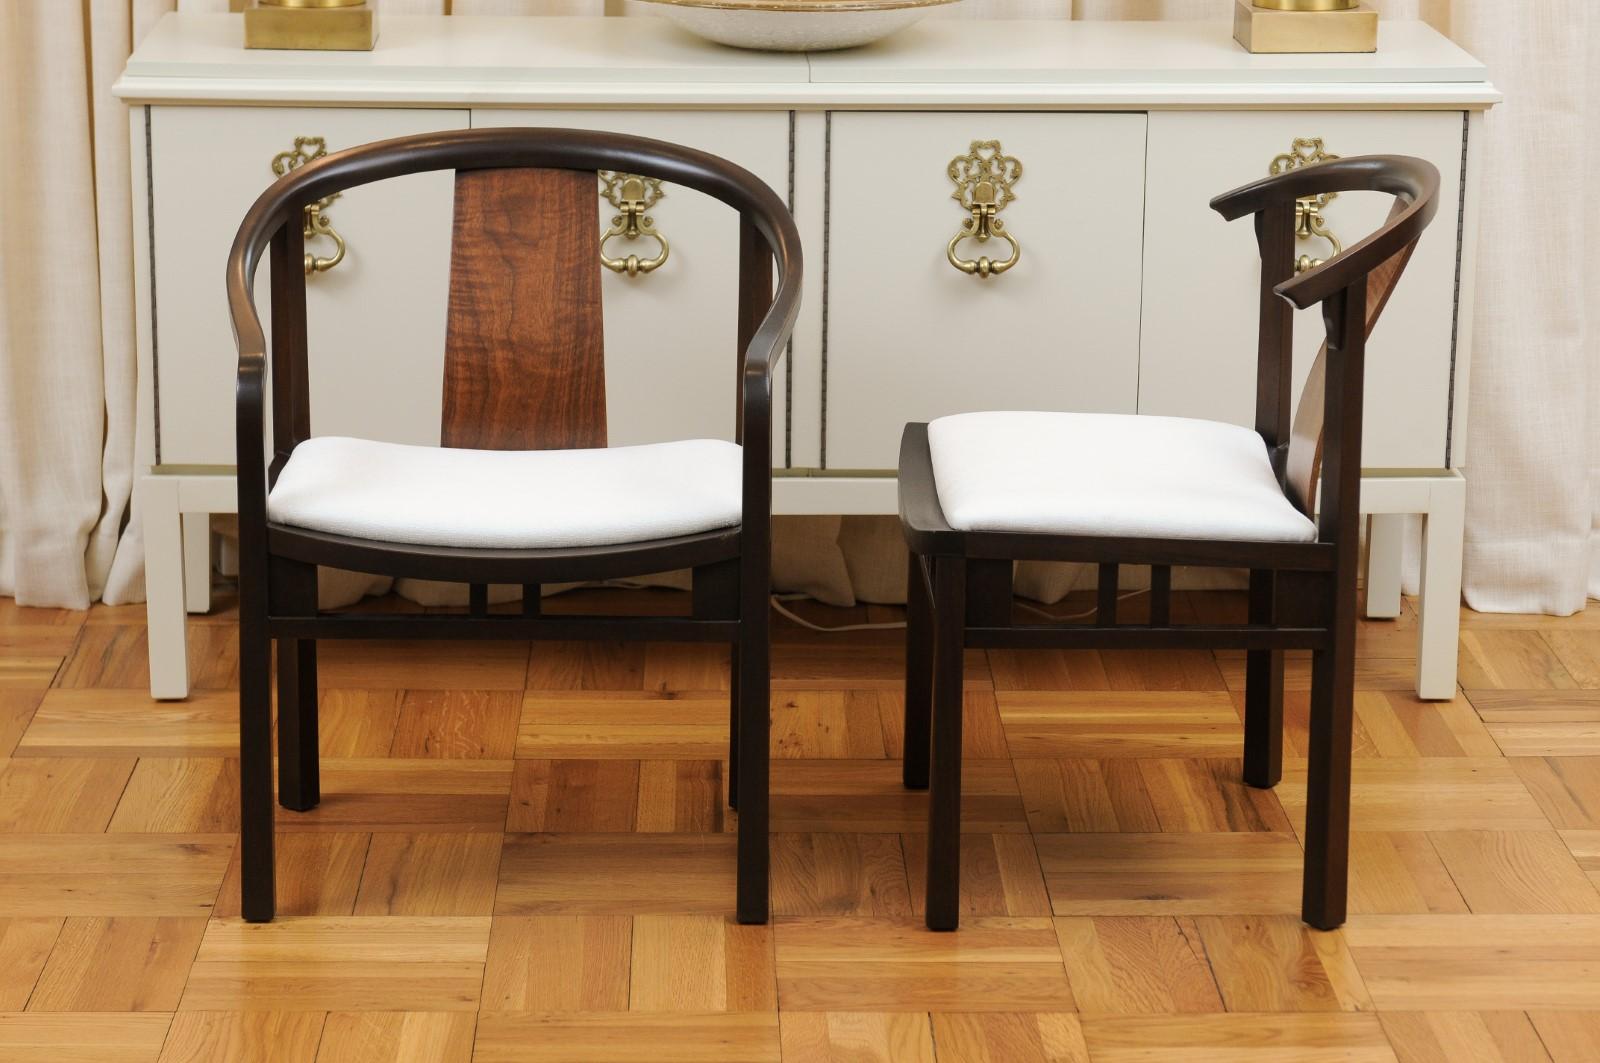 Stellar Set of 8 Walnut Dining Chairs by Michael Taylor for Baker, circa 1955 For Sale 6